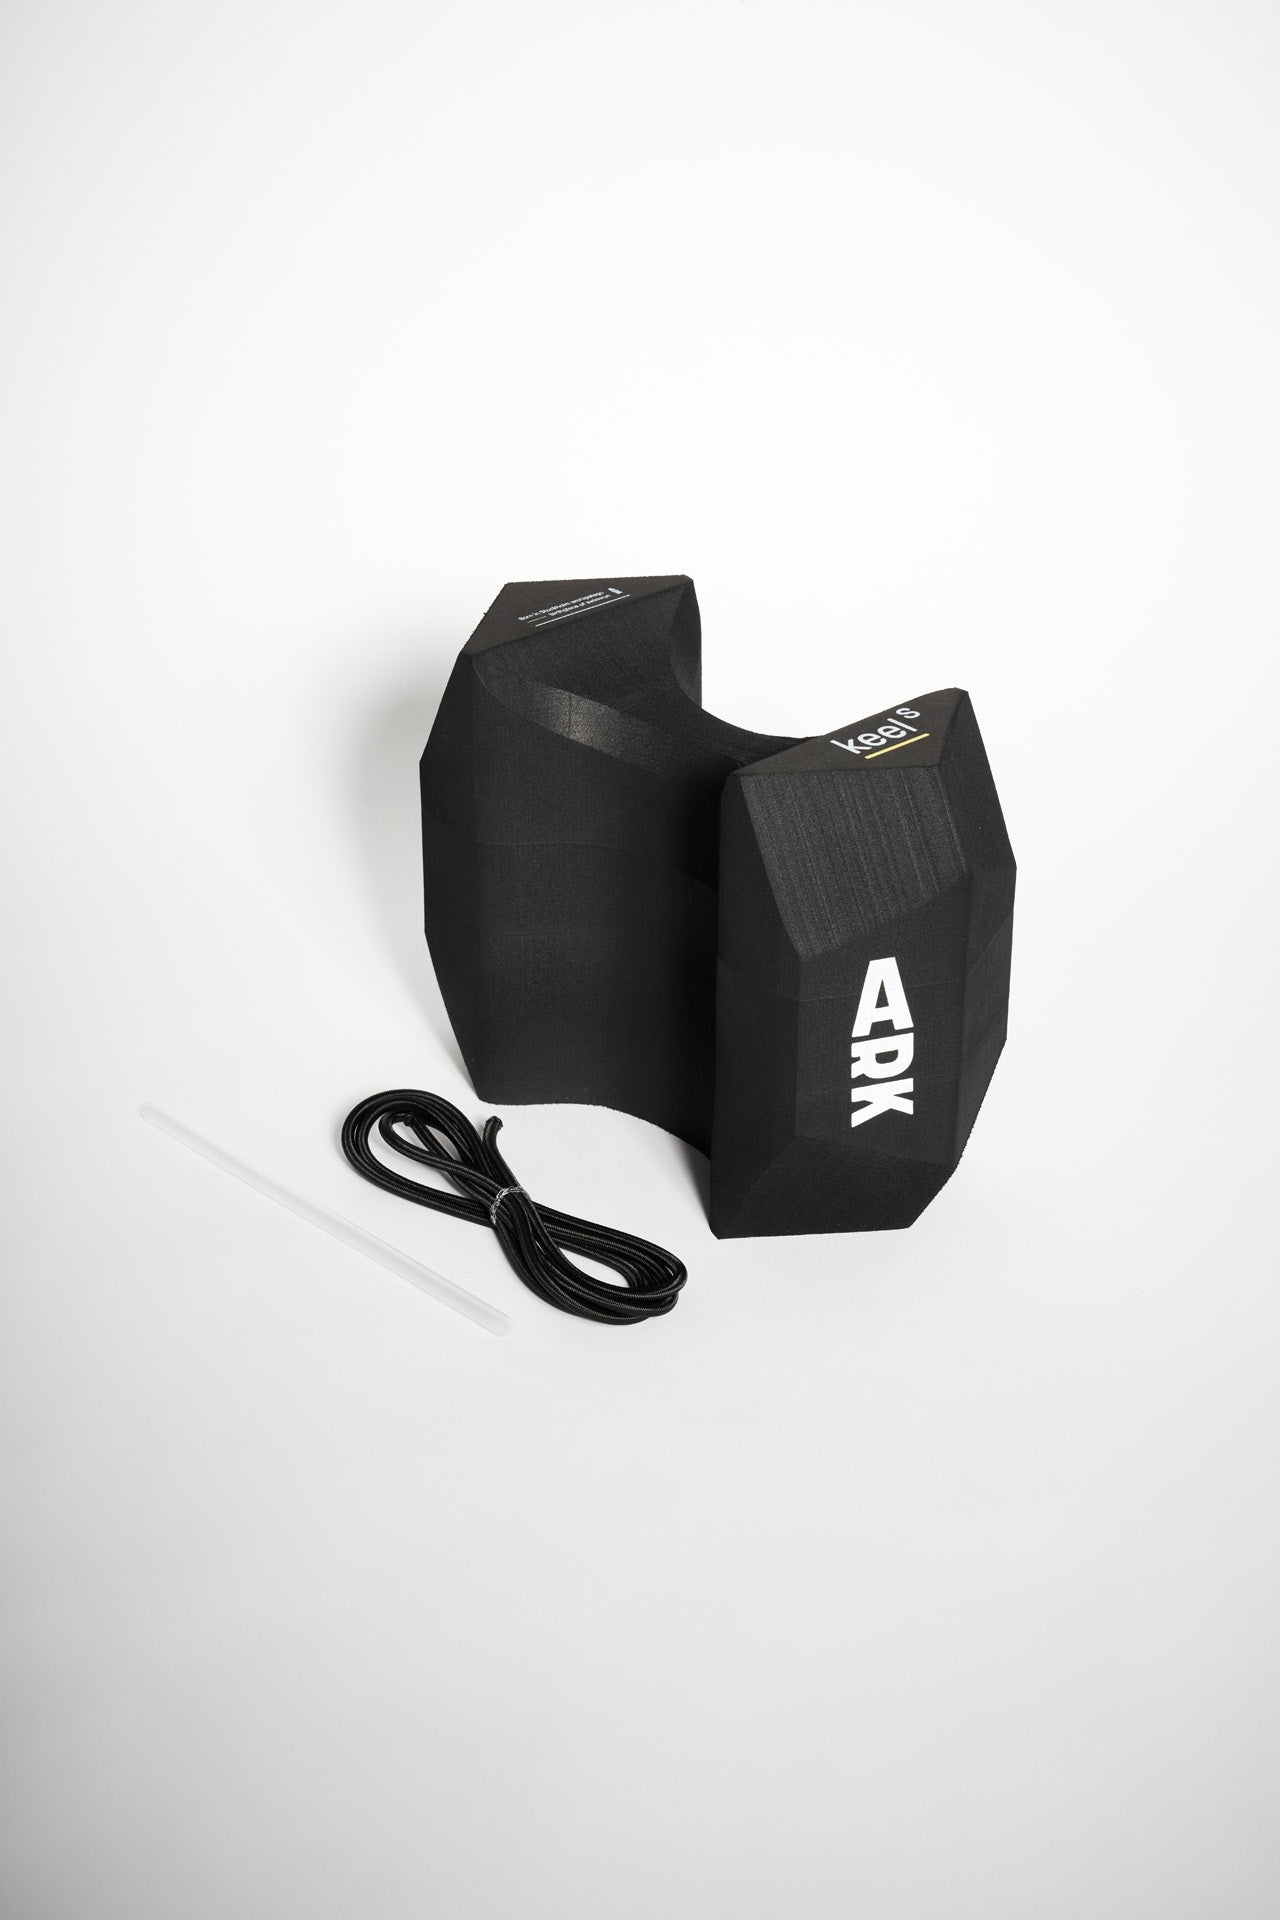 Product photo of ARK Keel™ S  Package with The KEEL kit